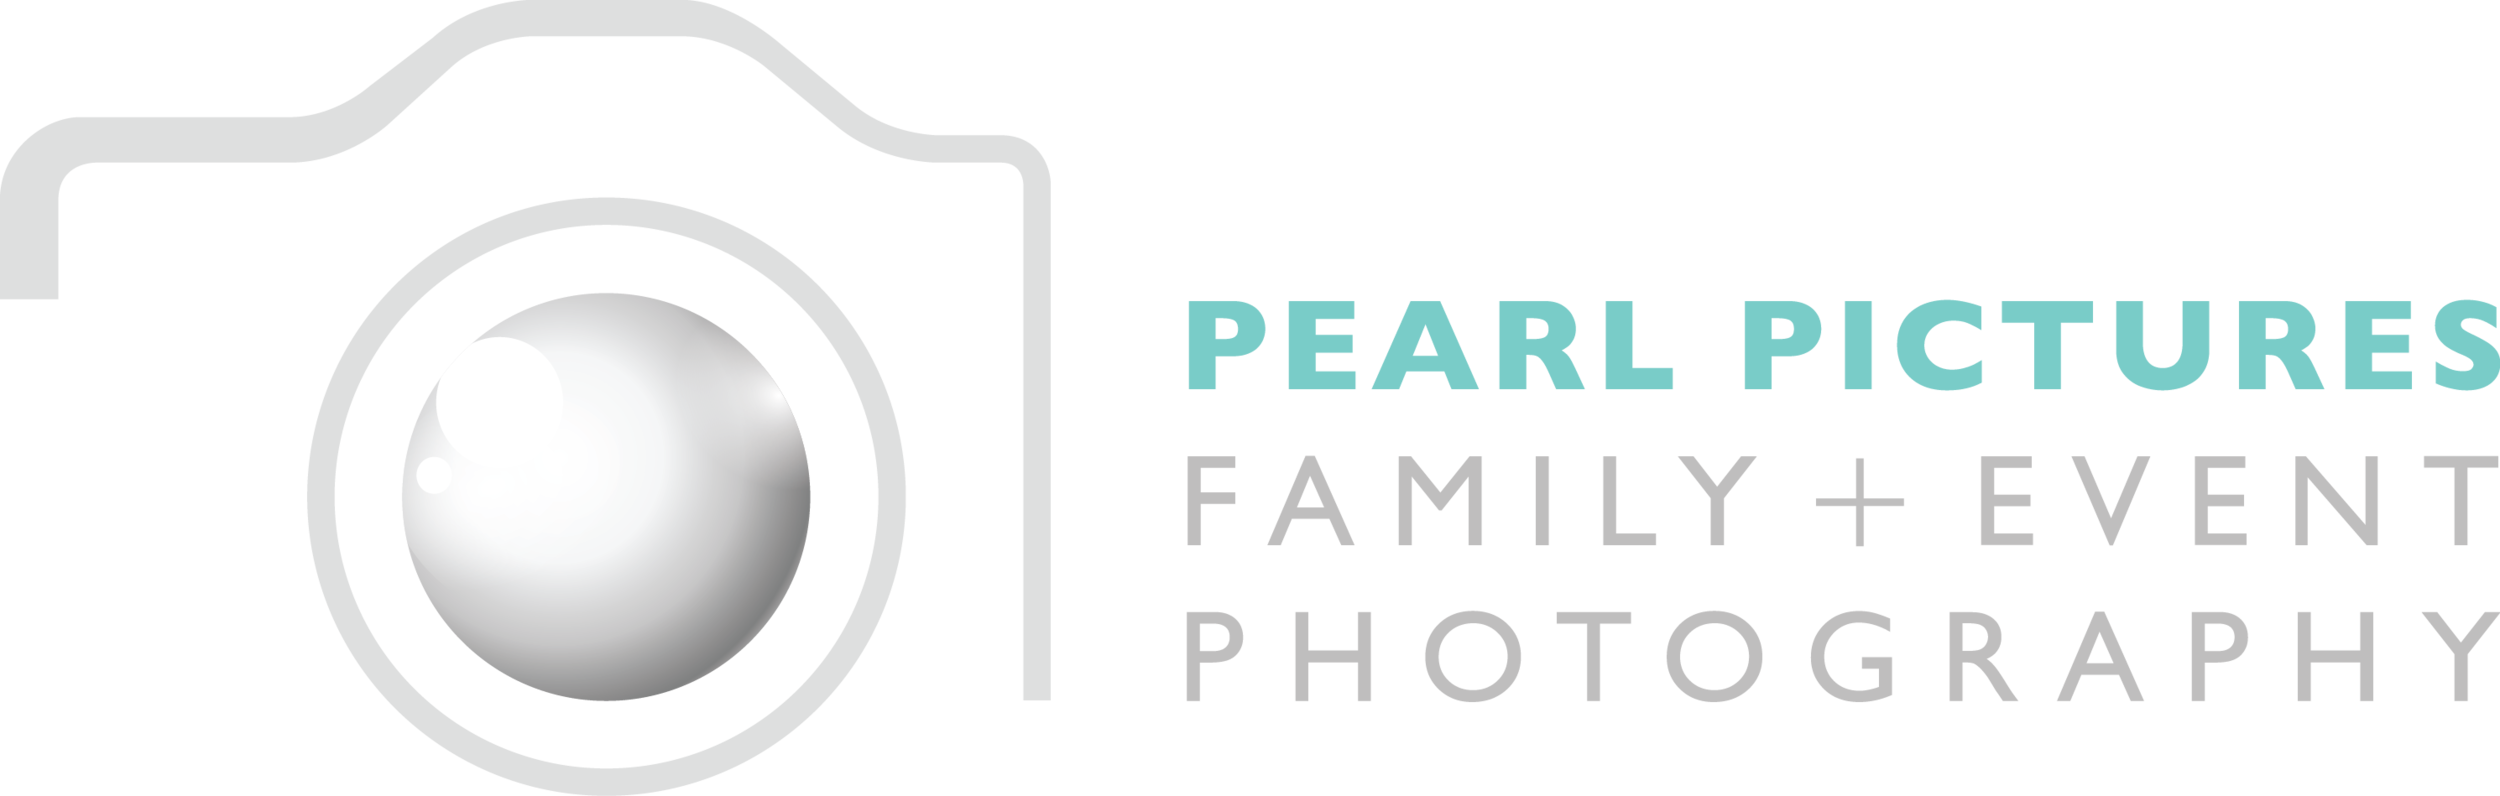 Pearl Pictures